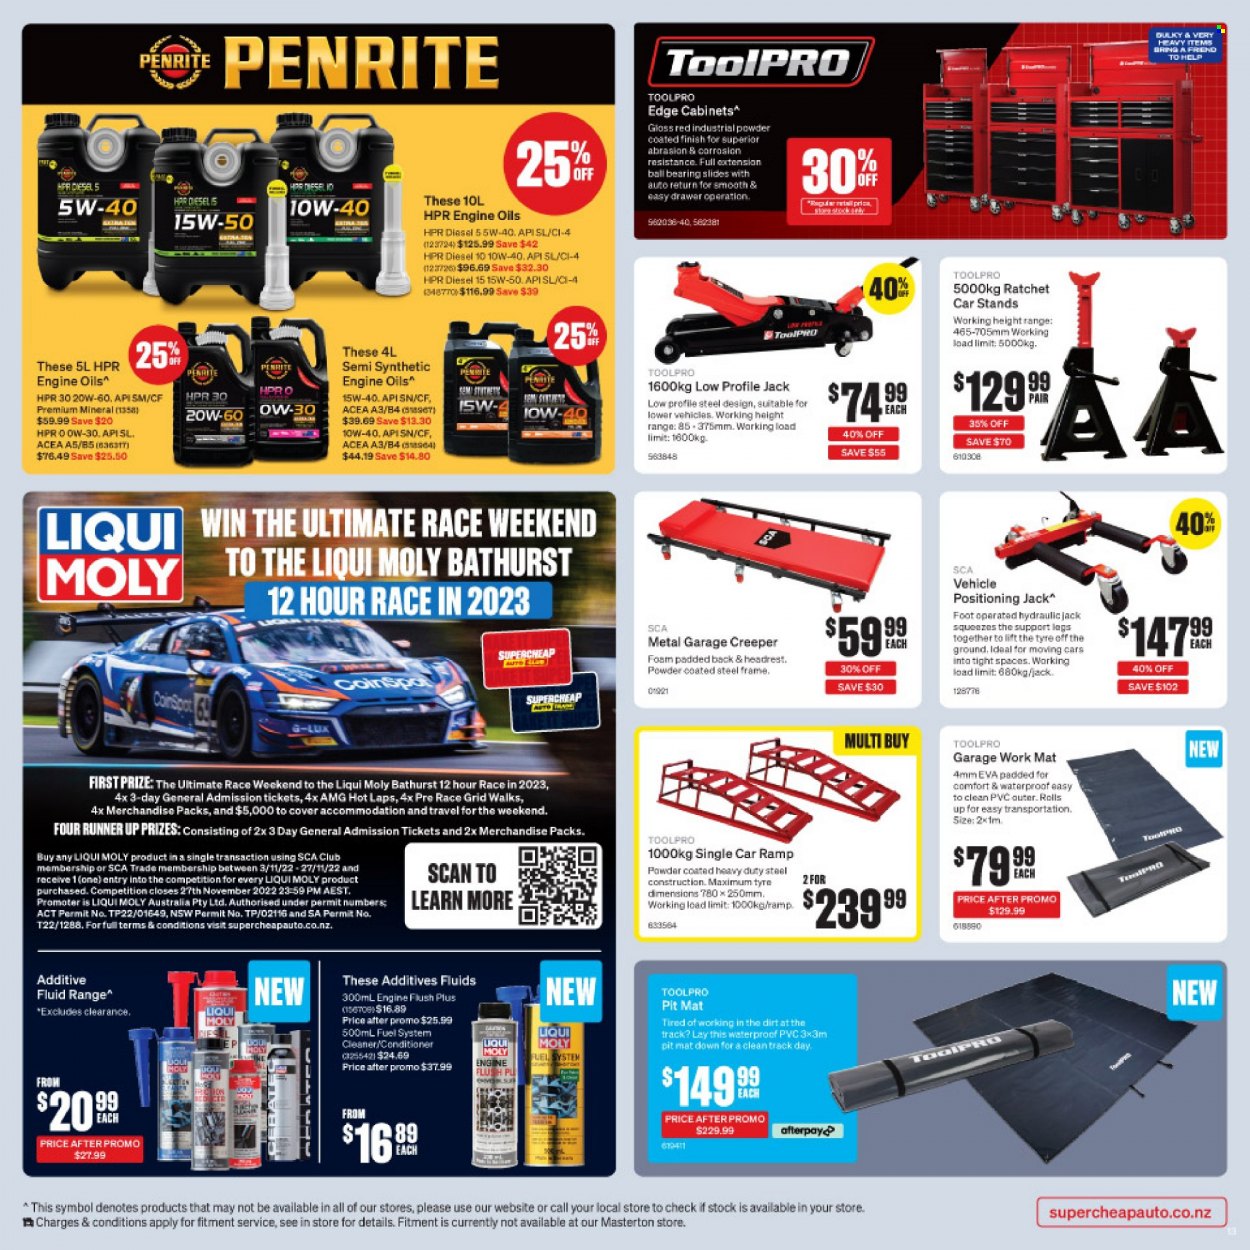 thumbnail - SuperCheap Auto mailer - 17.11.2022 - 27.11.2022 - Sales products - cleaner, low profile jack, vehicle positioning jack, fuel system cleaner, Penrite. Page 13.